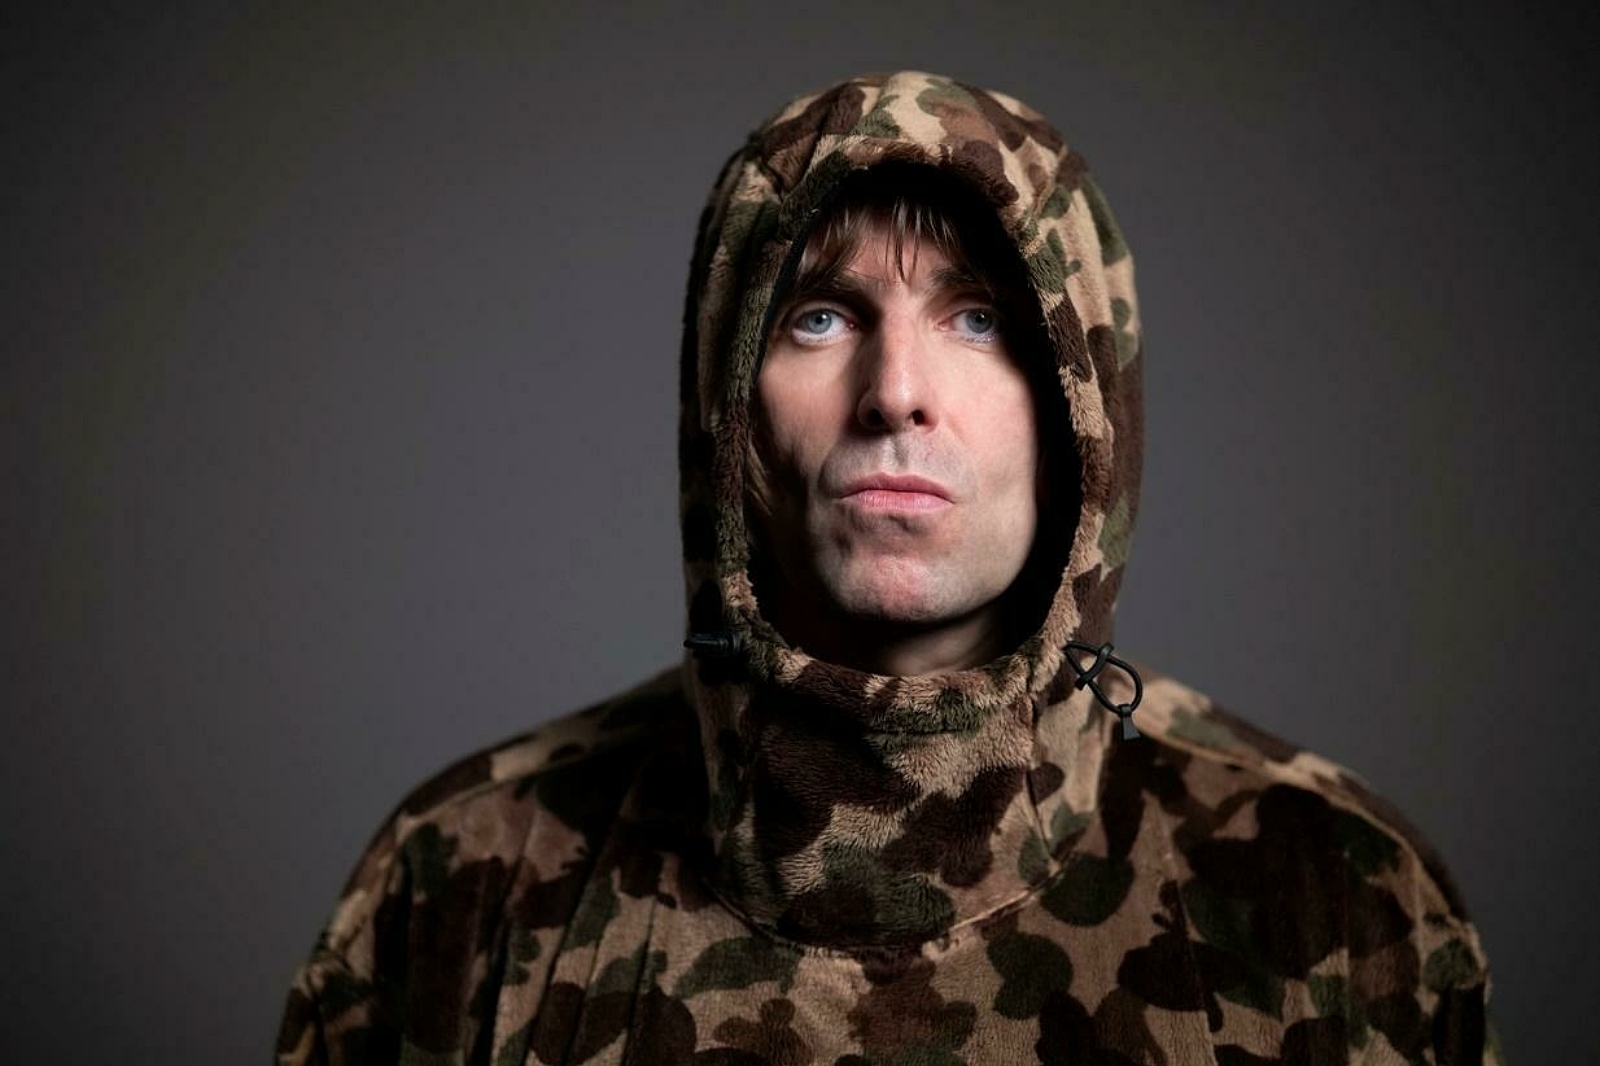 Liam Gallagher reveals 'Too Good For Giving Up' video